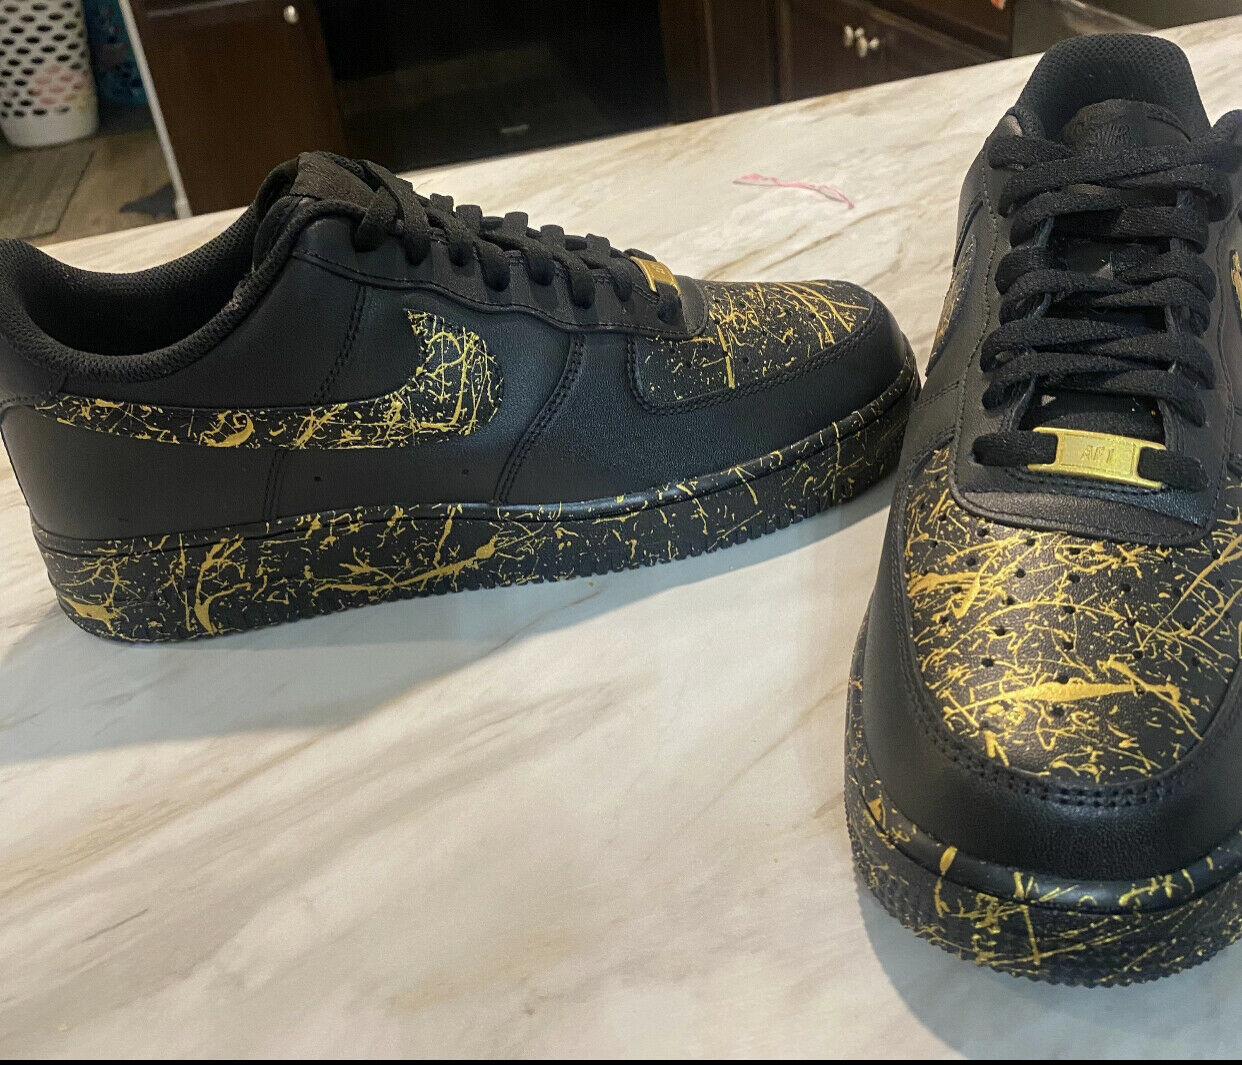 Custom Hand Painted Gold and Black Marble Nike Air Force 1 Low – B Street  Shoes